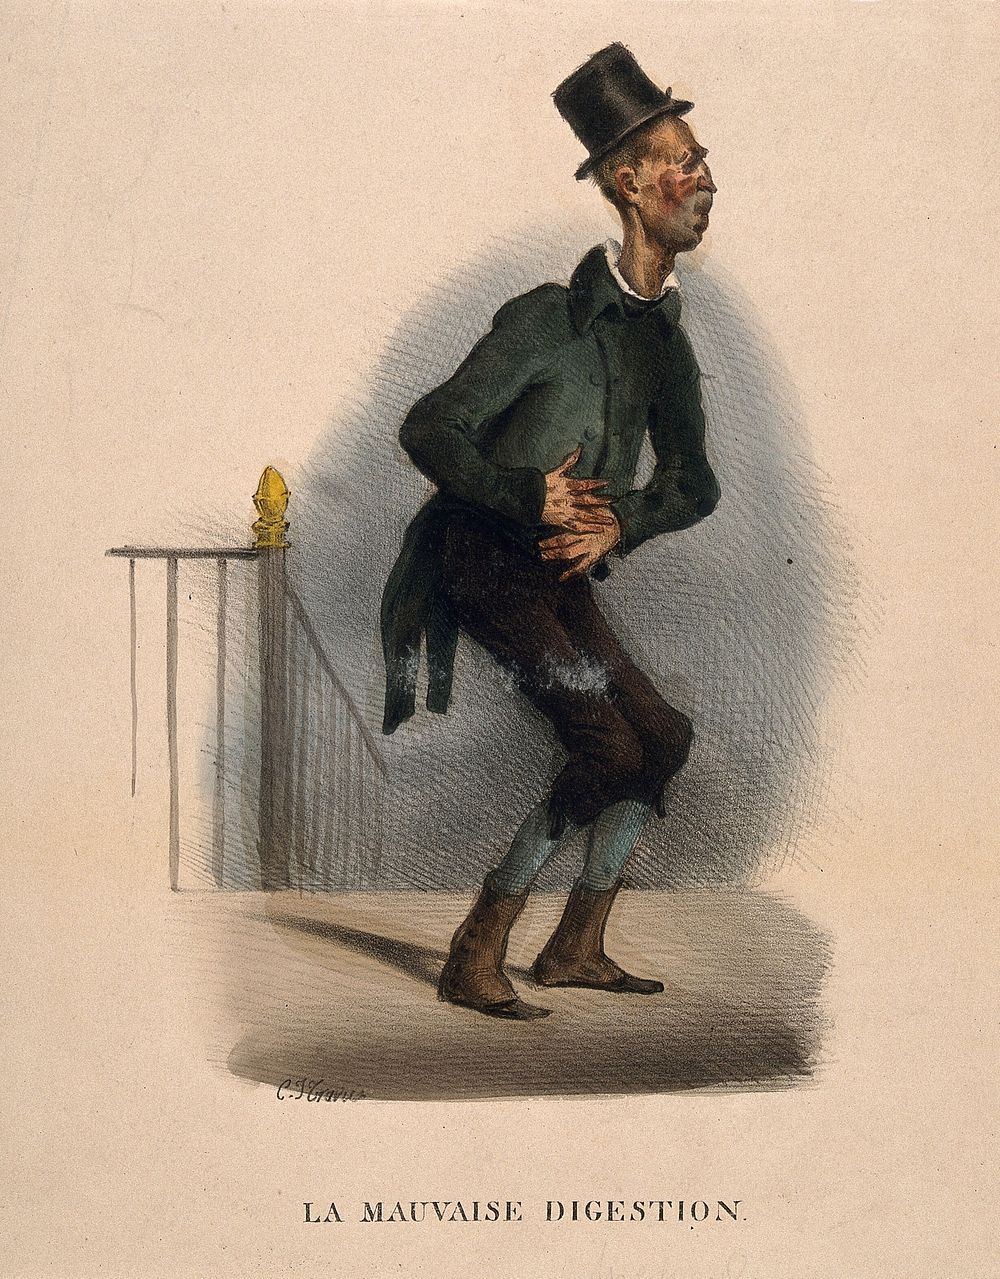 A poor man suffering from indigestion. Coloured lithograph by C.J. Traviès.